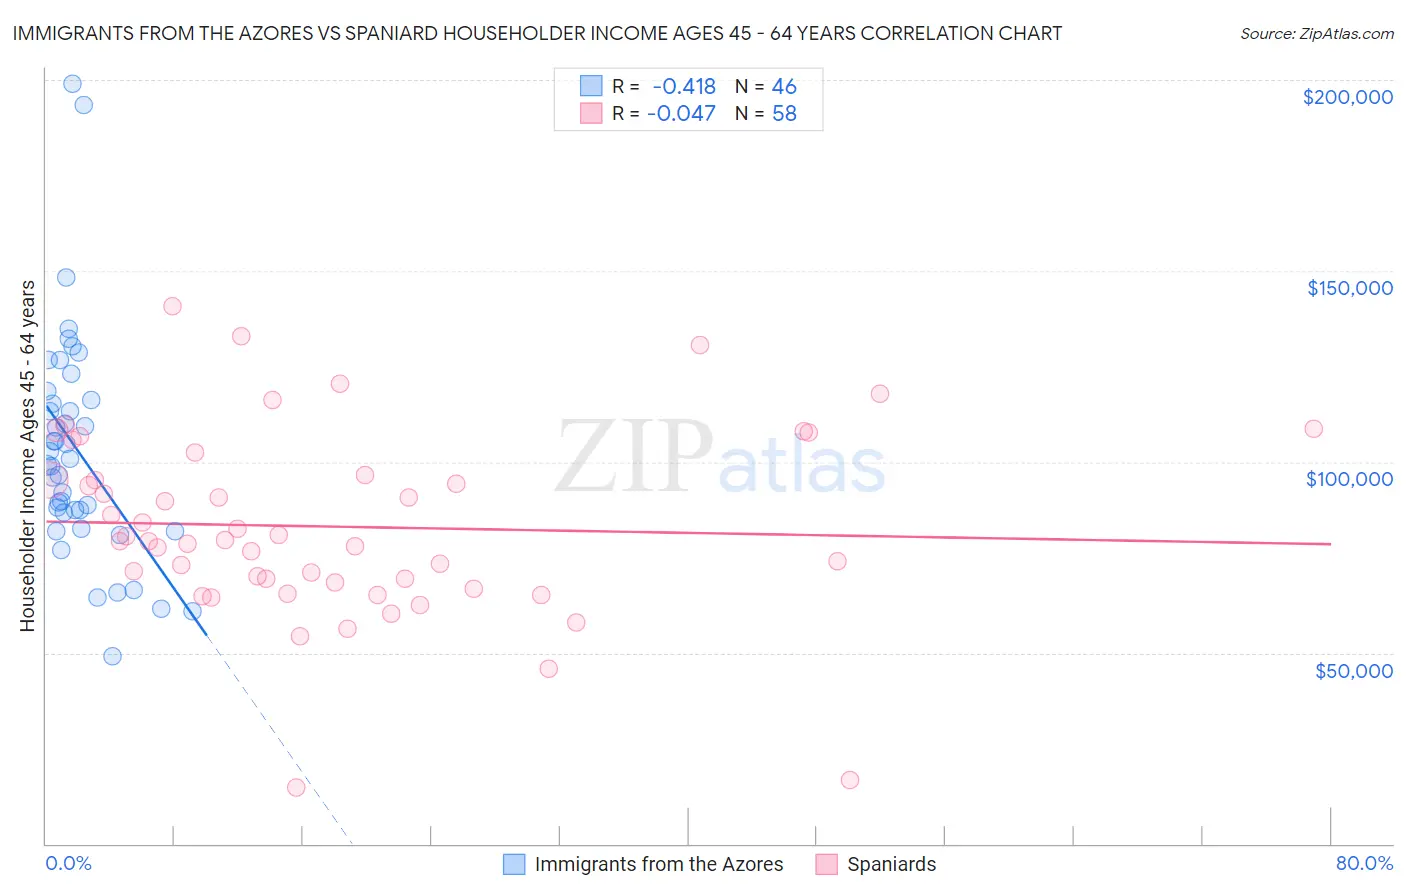 Immigrants from the Azores vs Spaniard Householder Income Ages 45 - 64 years